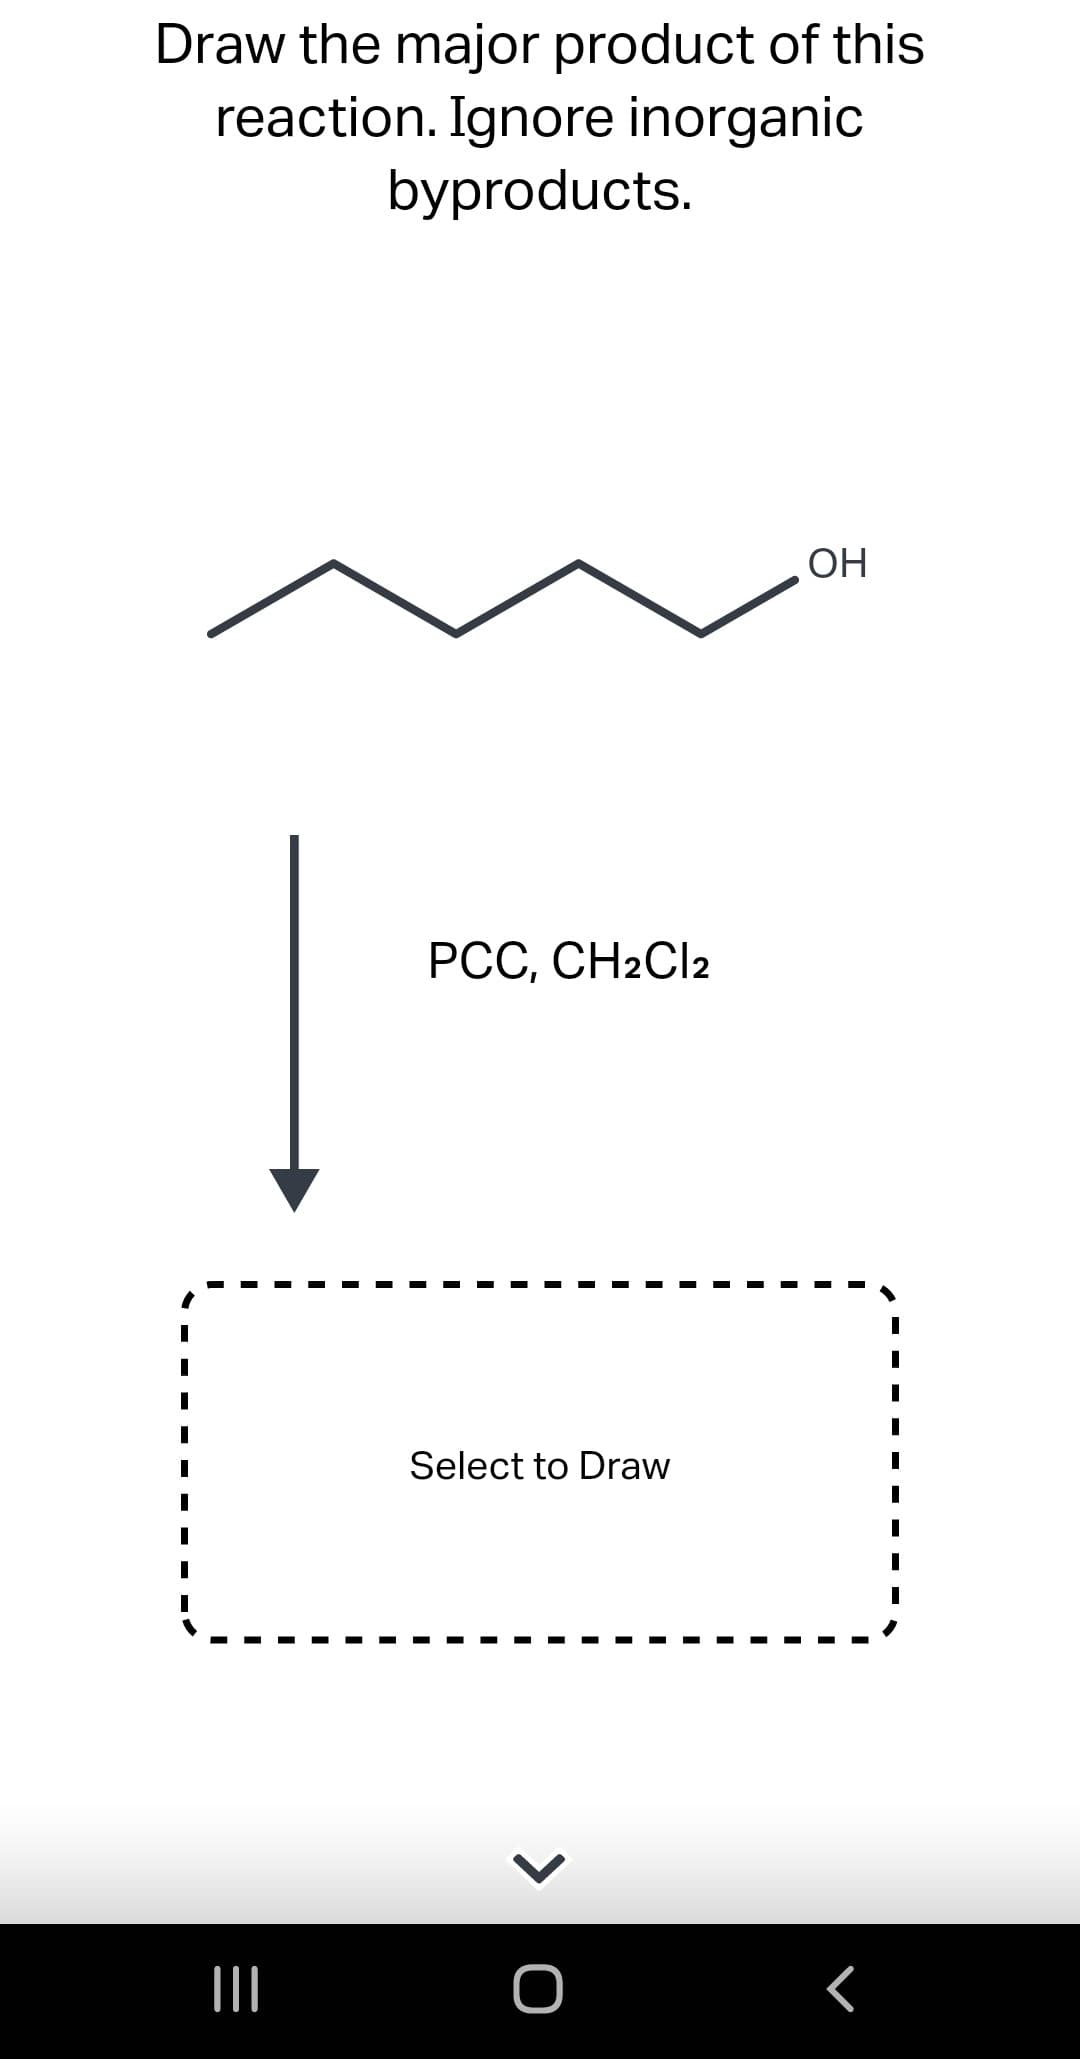 Draw the major product of this
reaction. Ignore inorganic
byproducts.
|||
PCC, CH2Cl2
Select to Draw
> O
OH
r